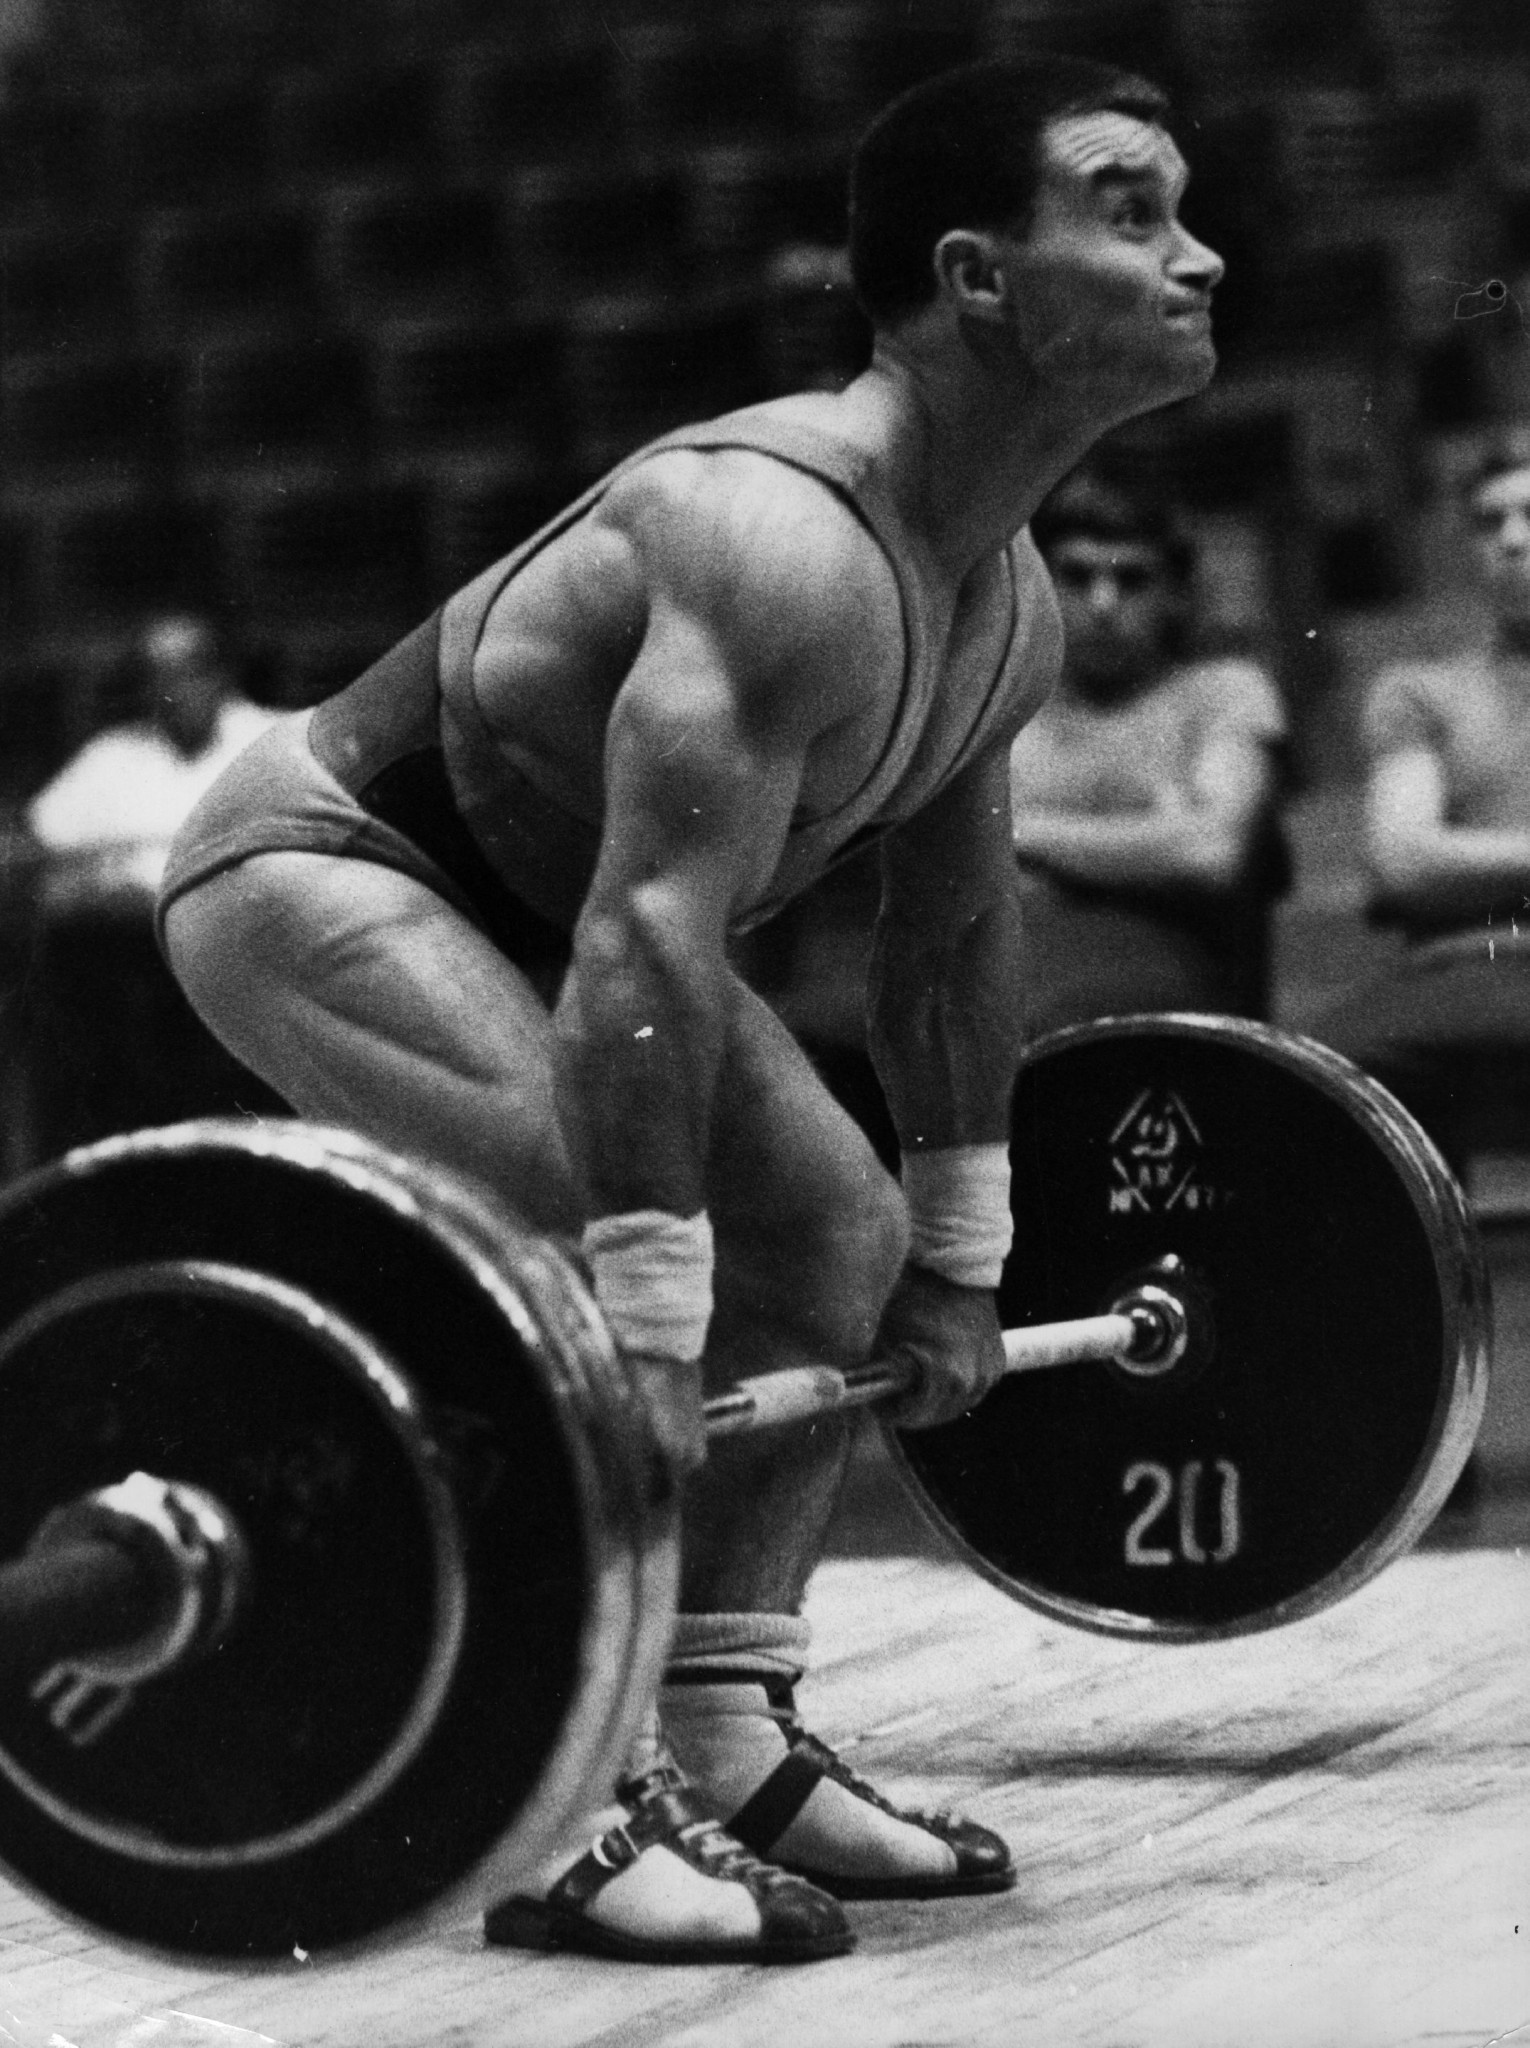 Hungarian weightlifter Imre Foldi in action at the 1968 Mexico City Olympic Games ©Getty Images